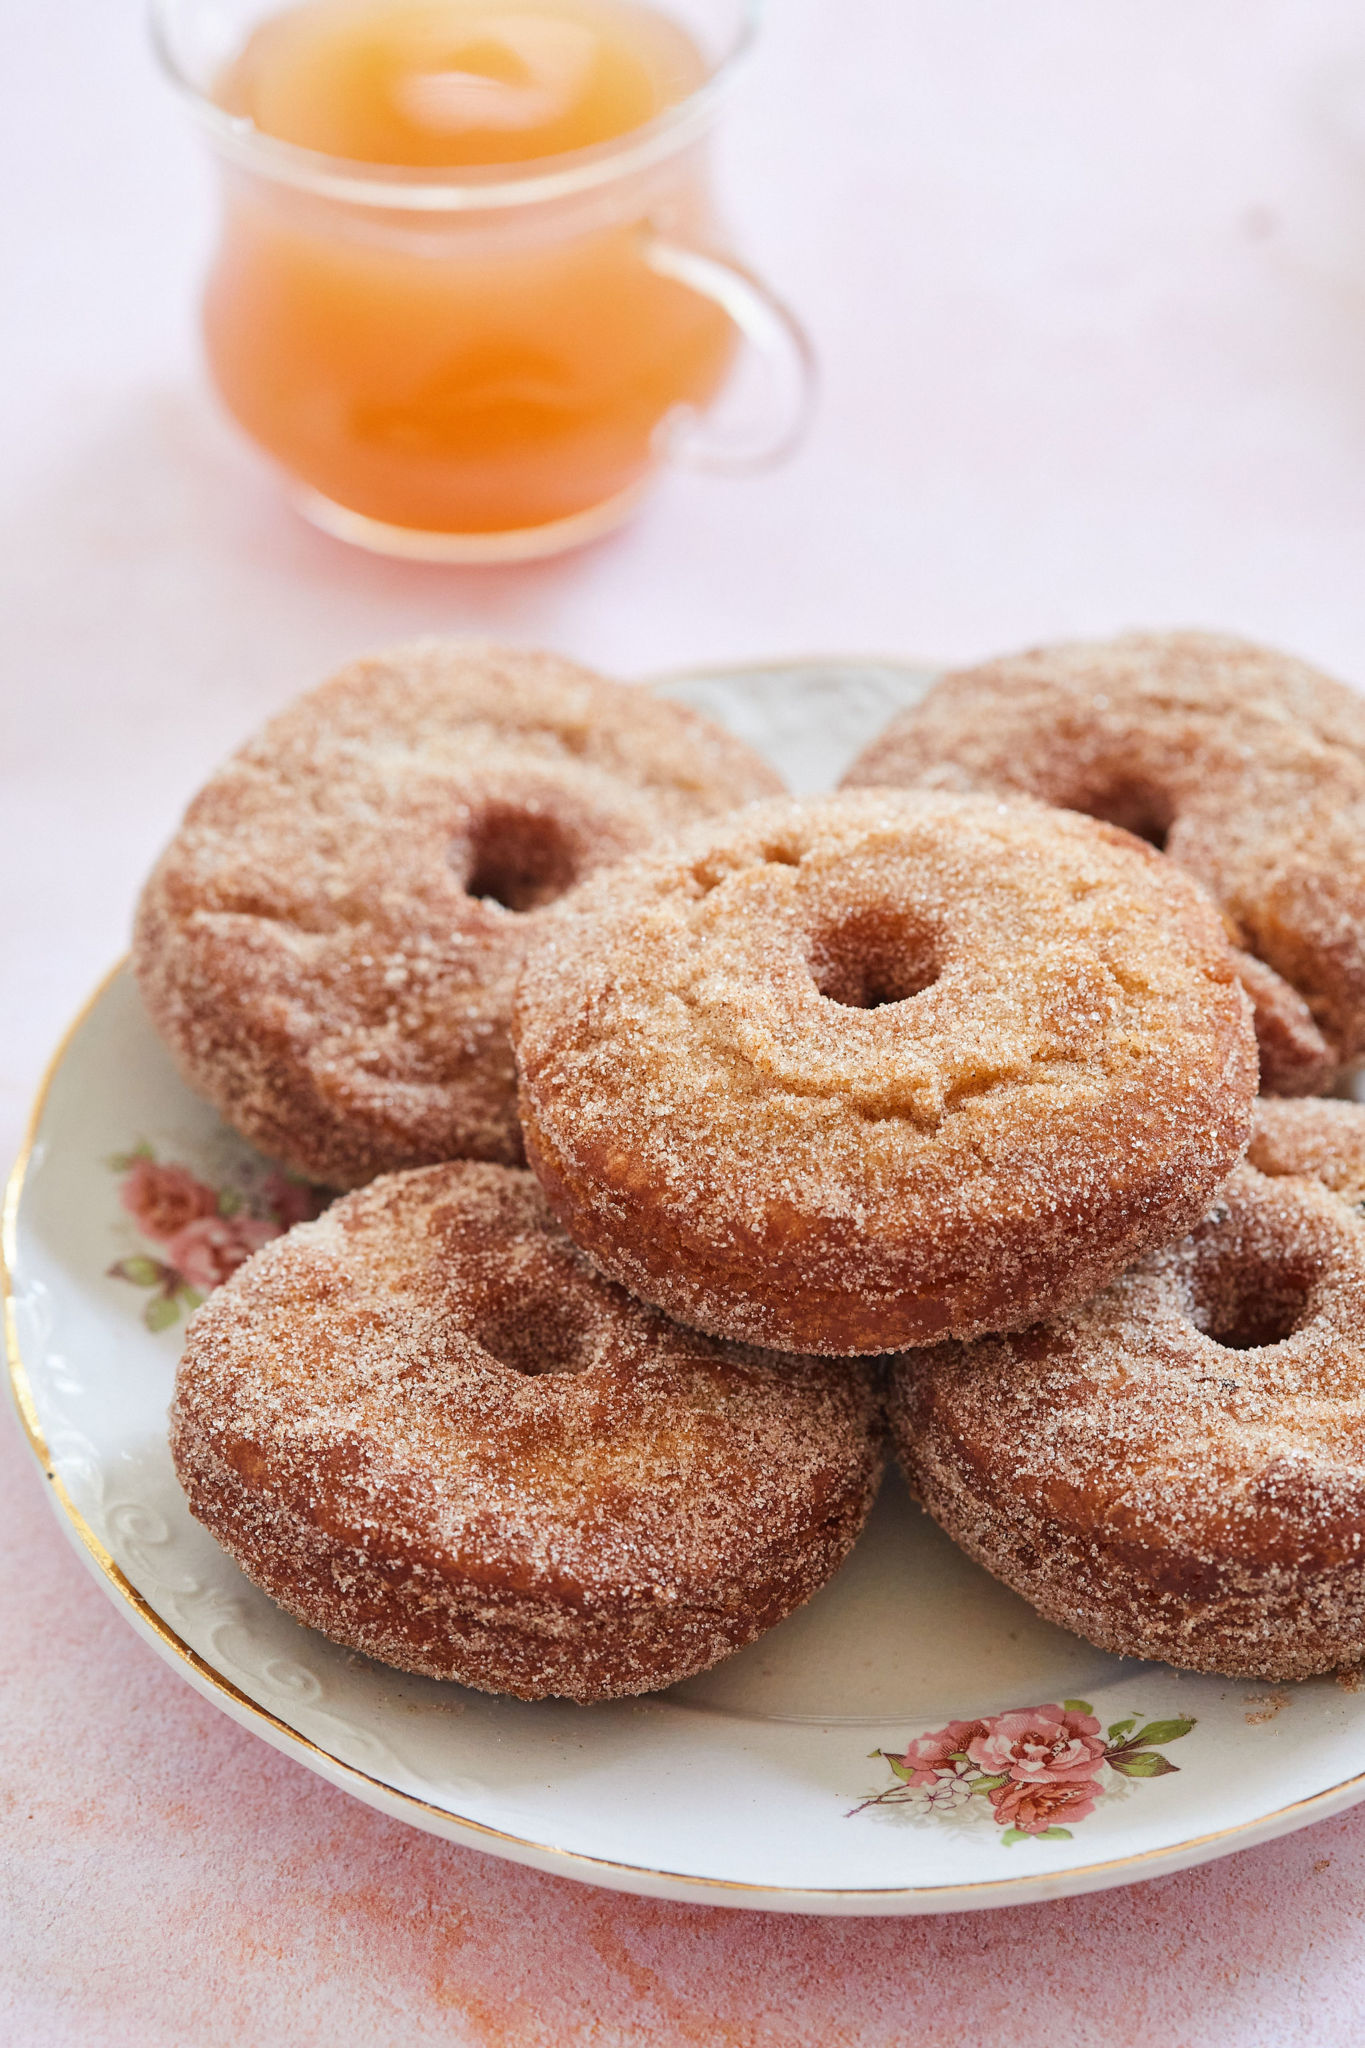 A plate of apple cider donuts covered in cinnamon sugar.